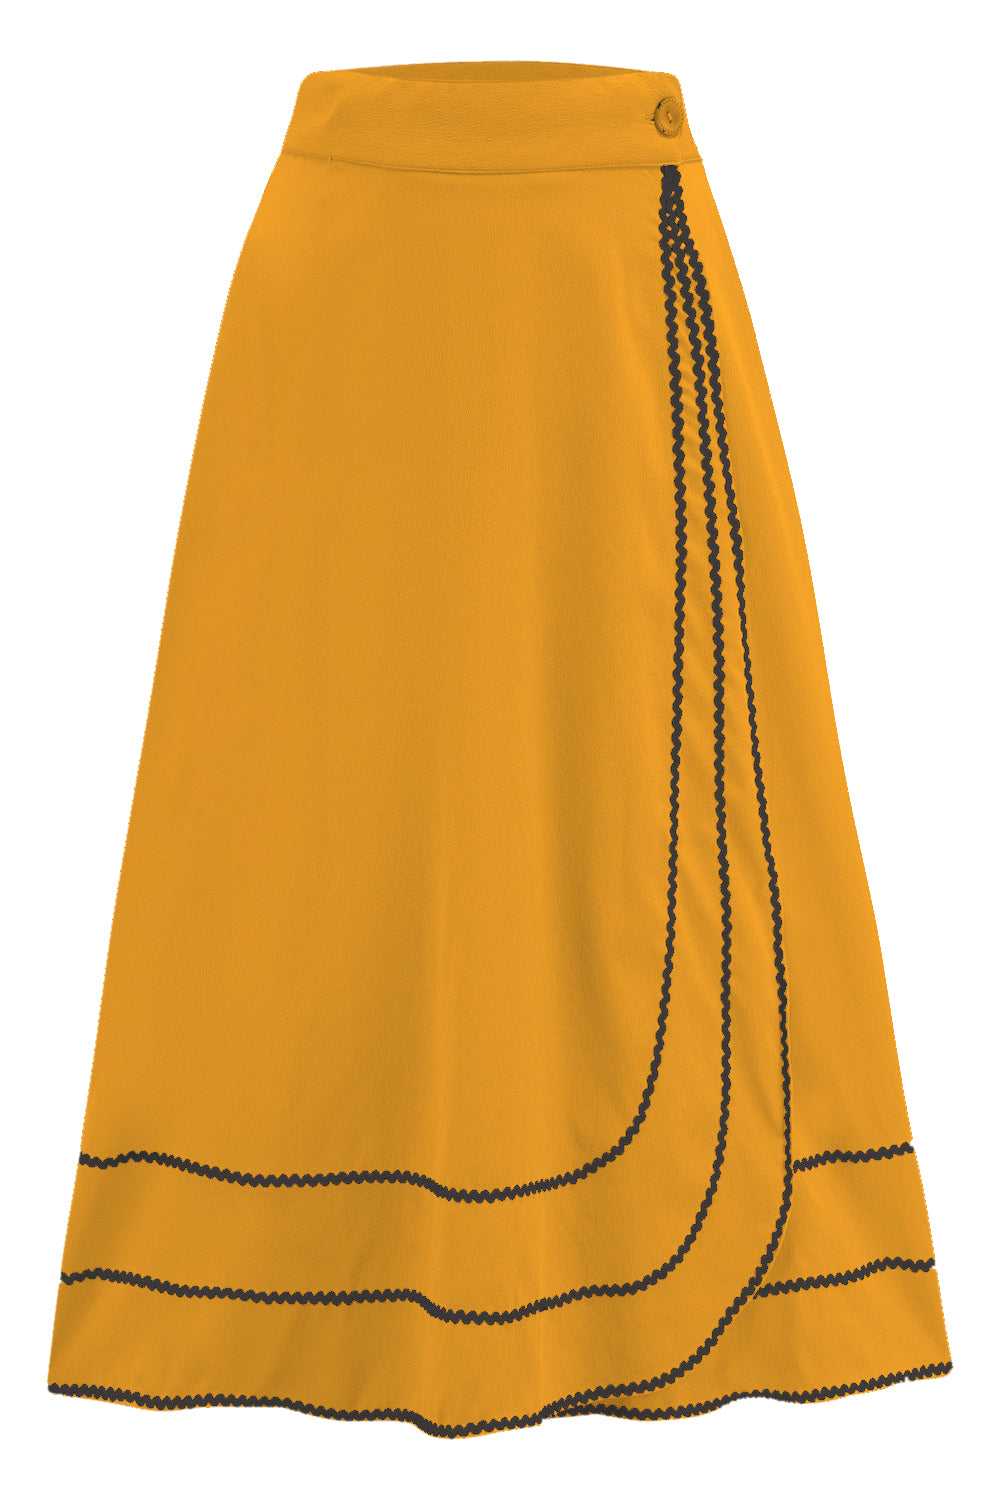 The "Glynis" Wrap Around Circle Skirt with Pockets in Mustard with Black Ric Rac, True & Authentic 1950s Vintage Style